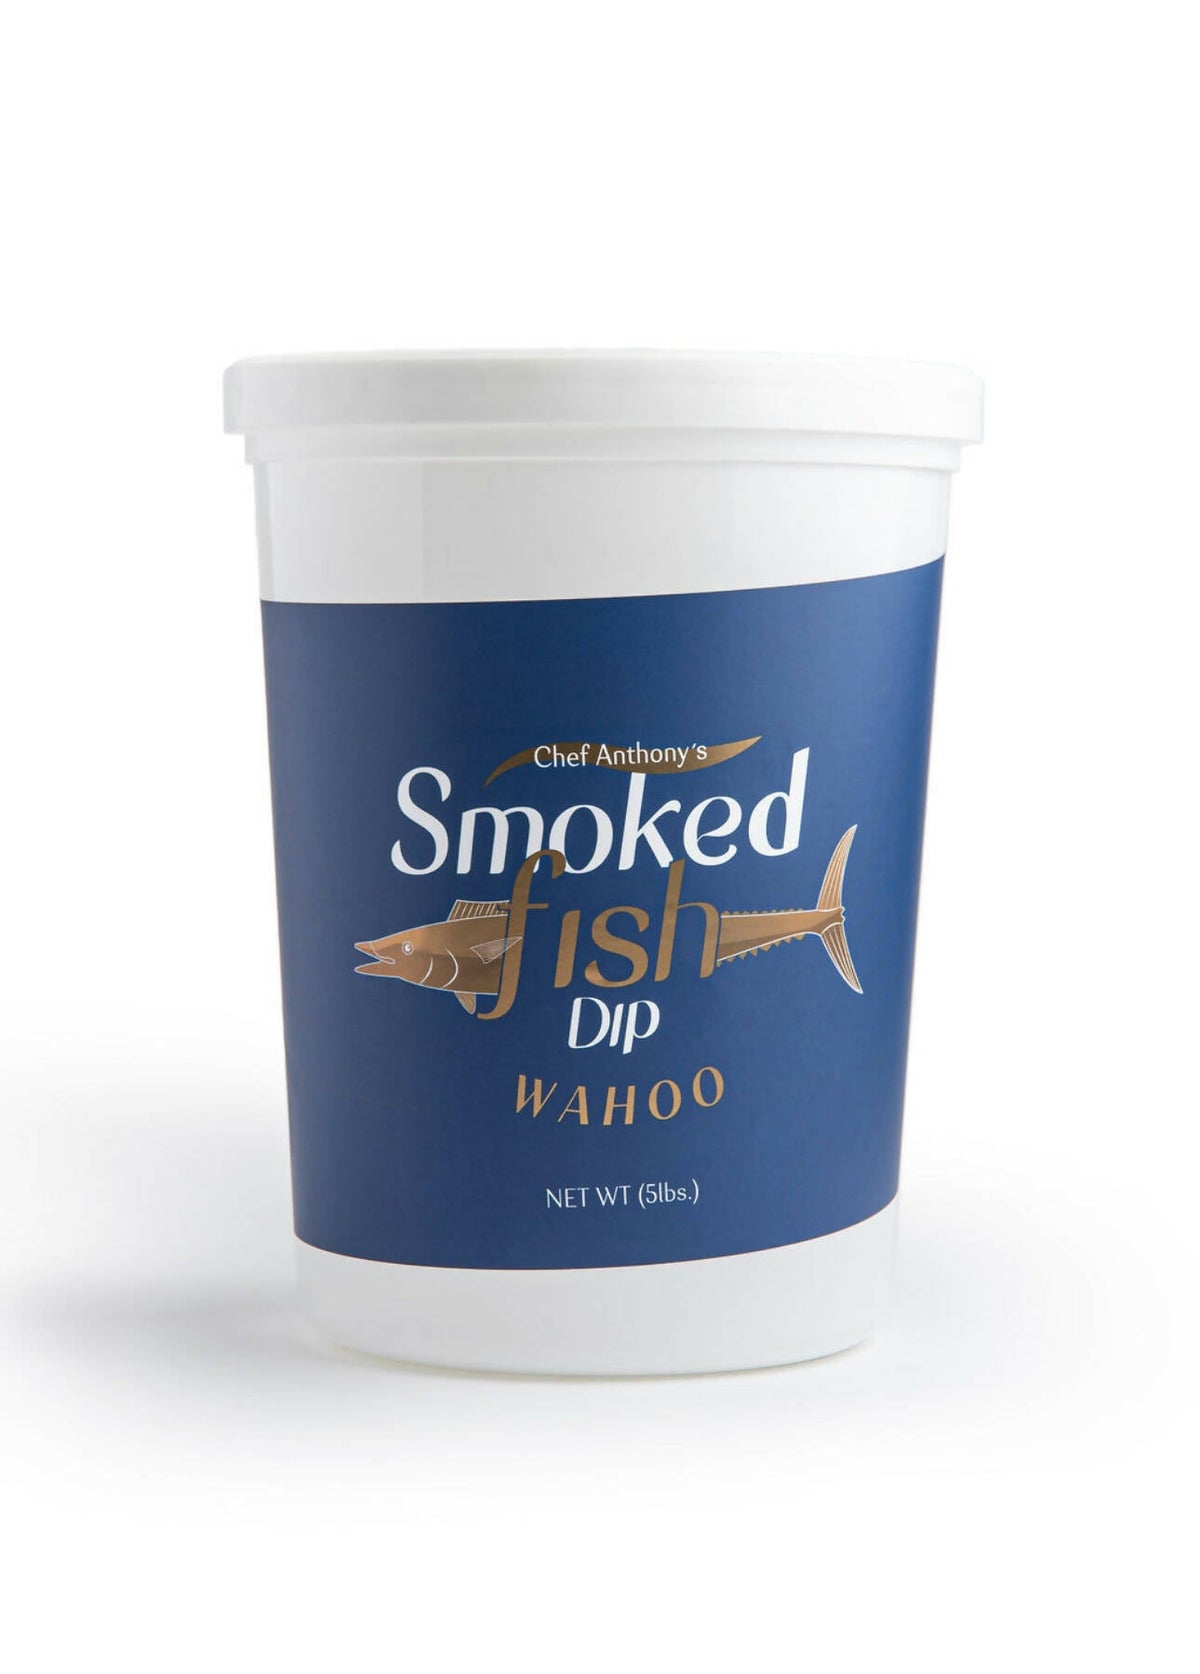 Chef Anthony's Smoked Fish Dip Buckets - 1 bucket x 5 LB by Farm2Me